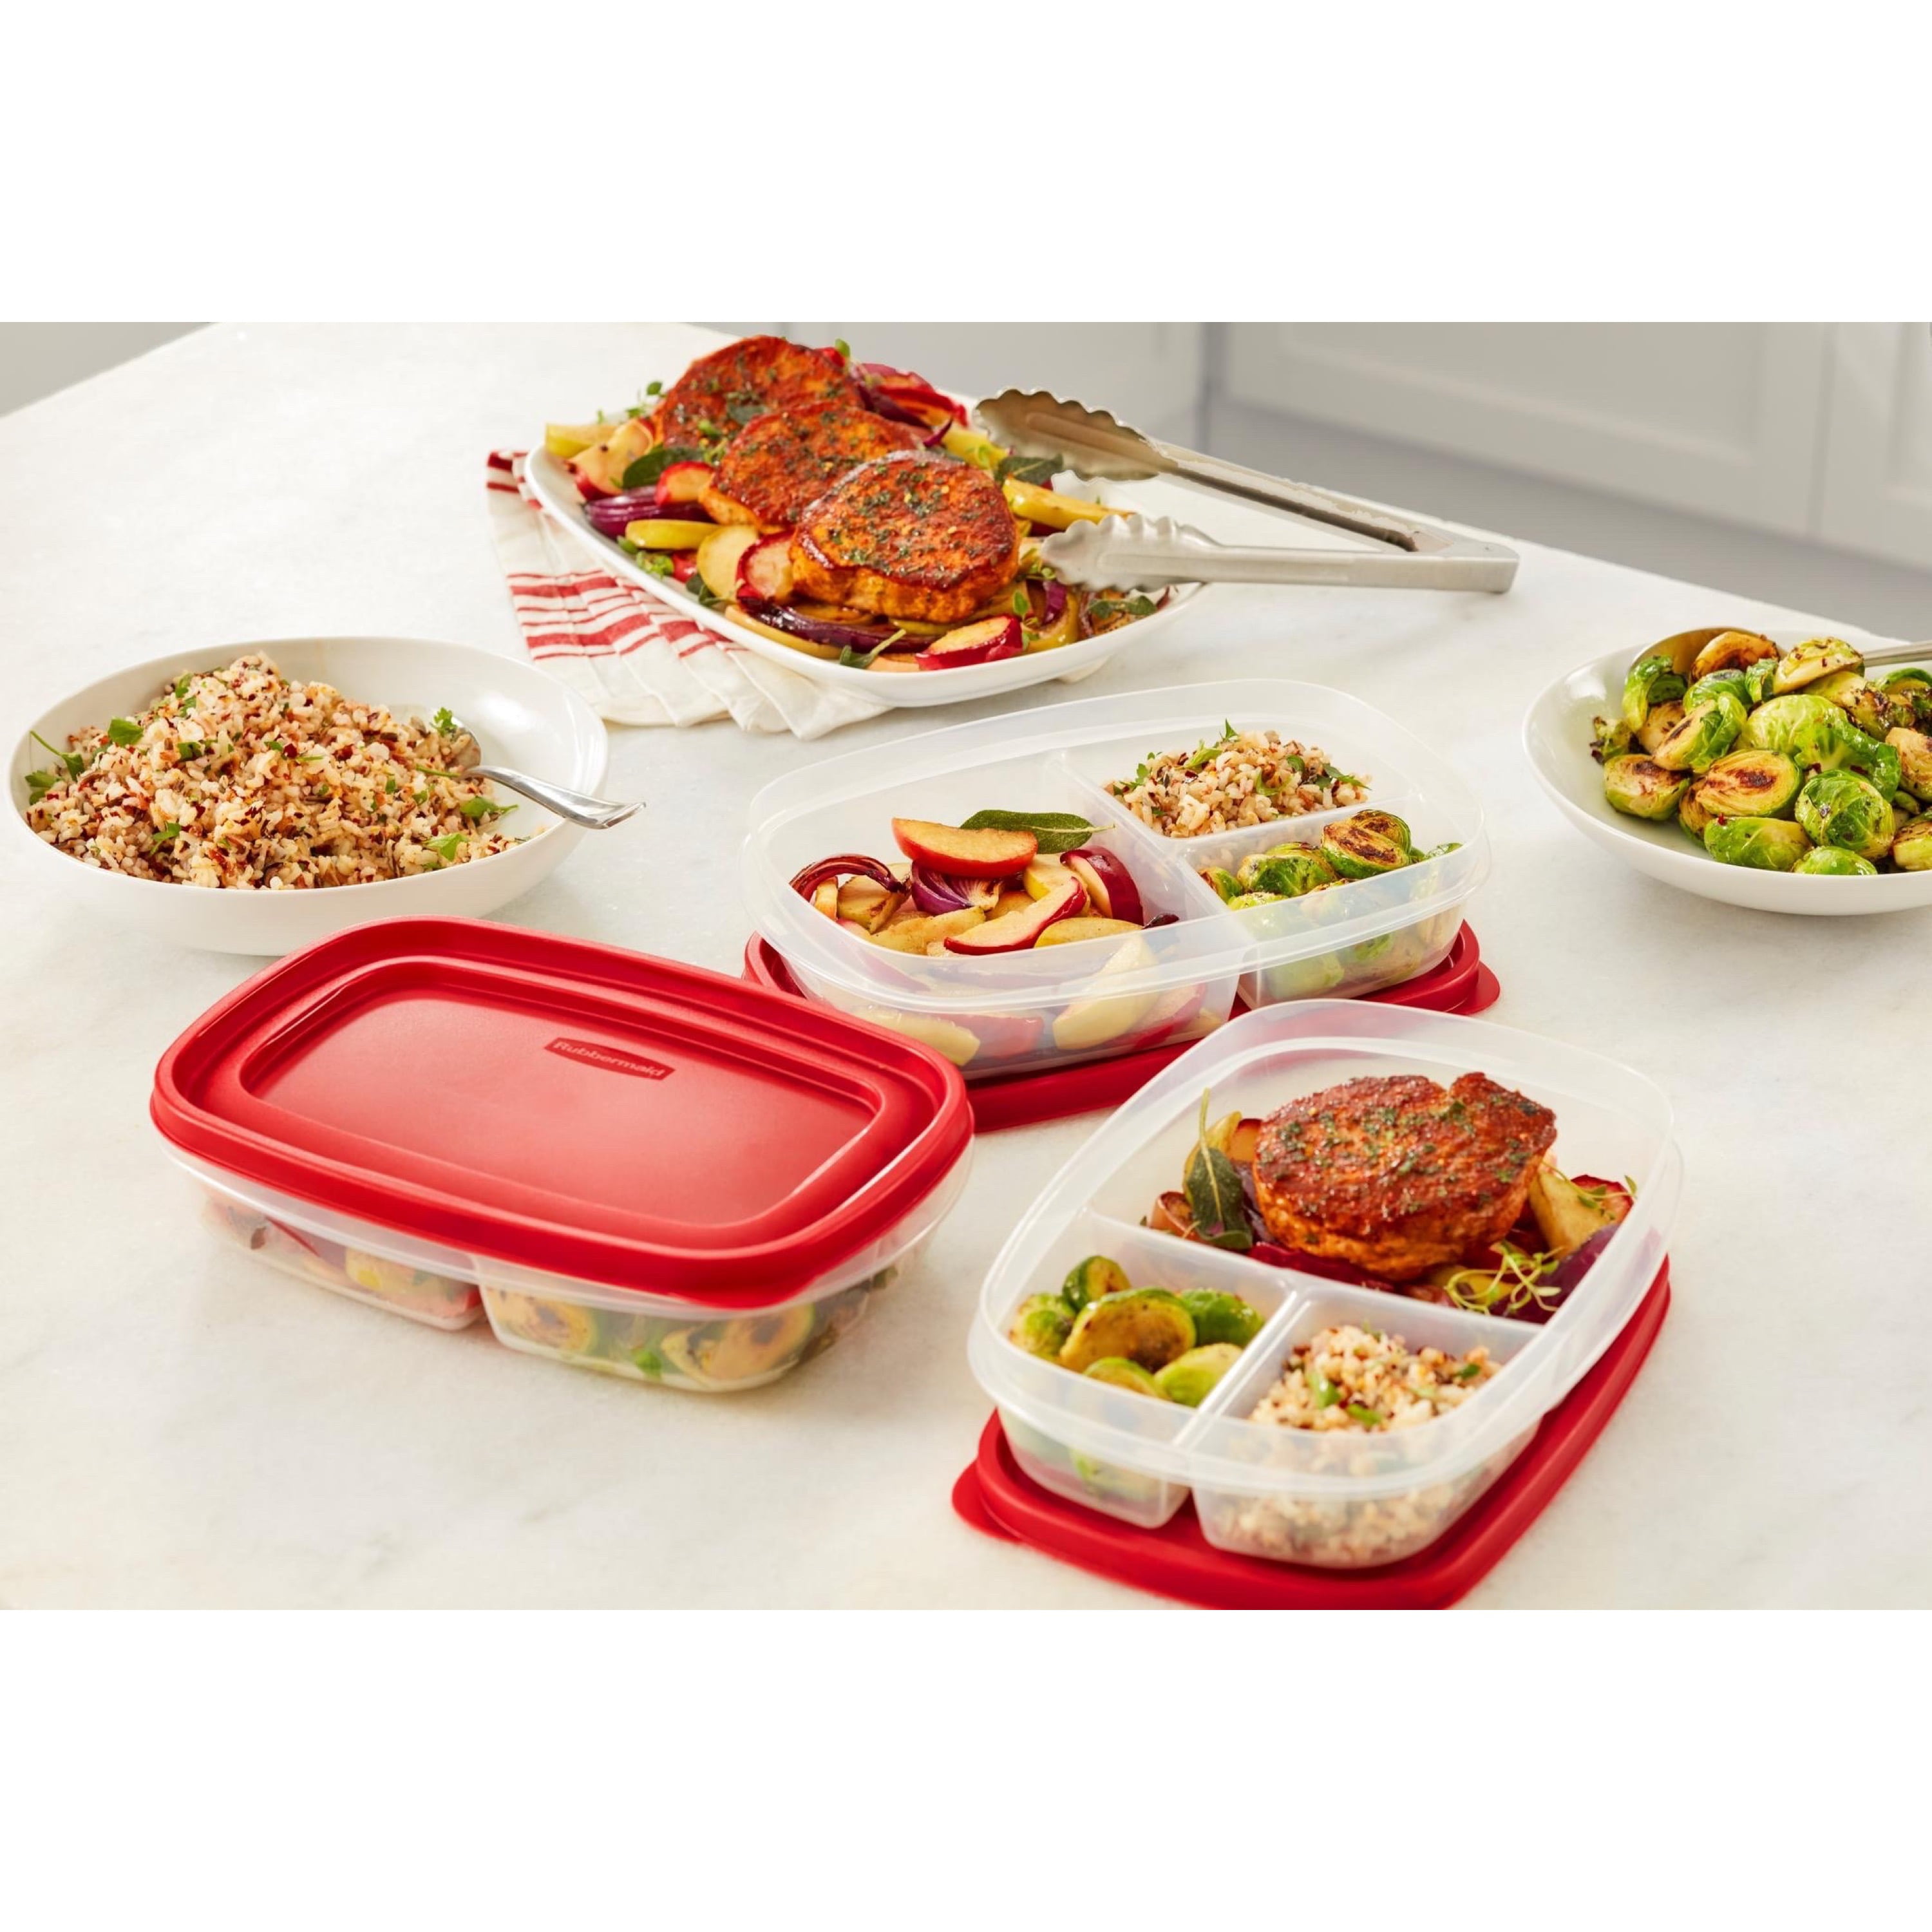 Rubbermaid Easy Find Lids Modular Canisters - 3 pack, 6 piece set